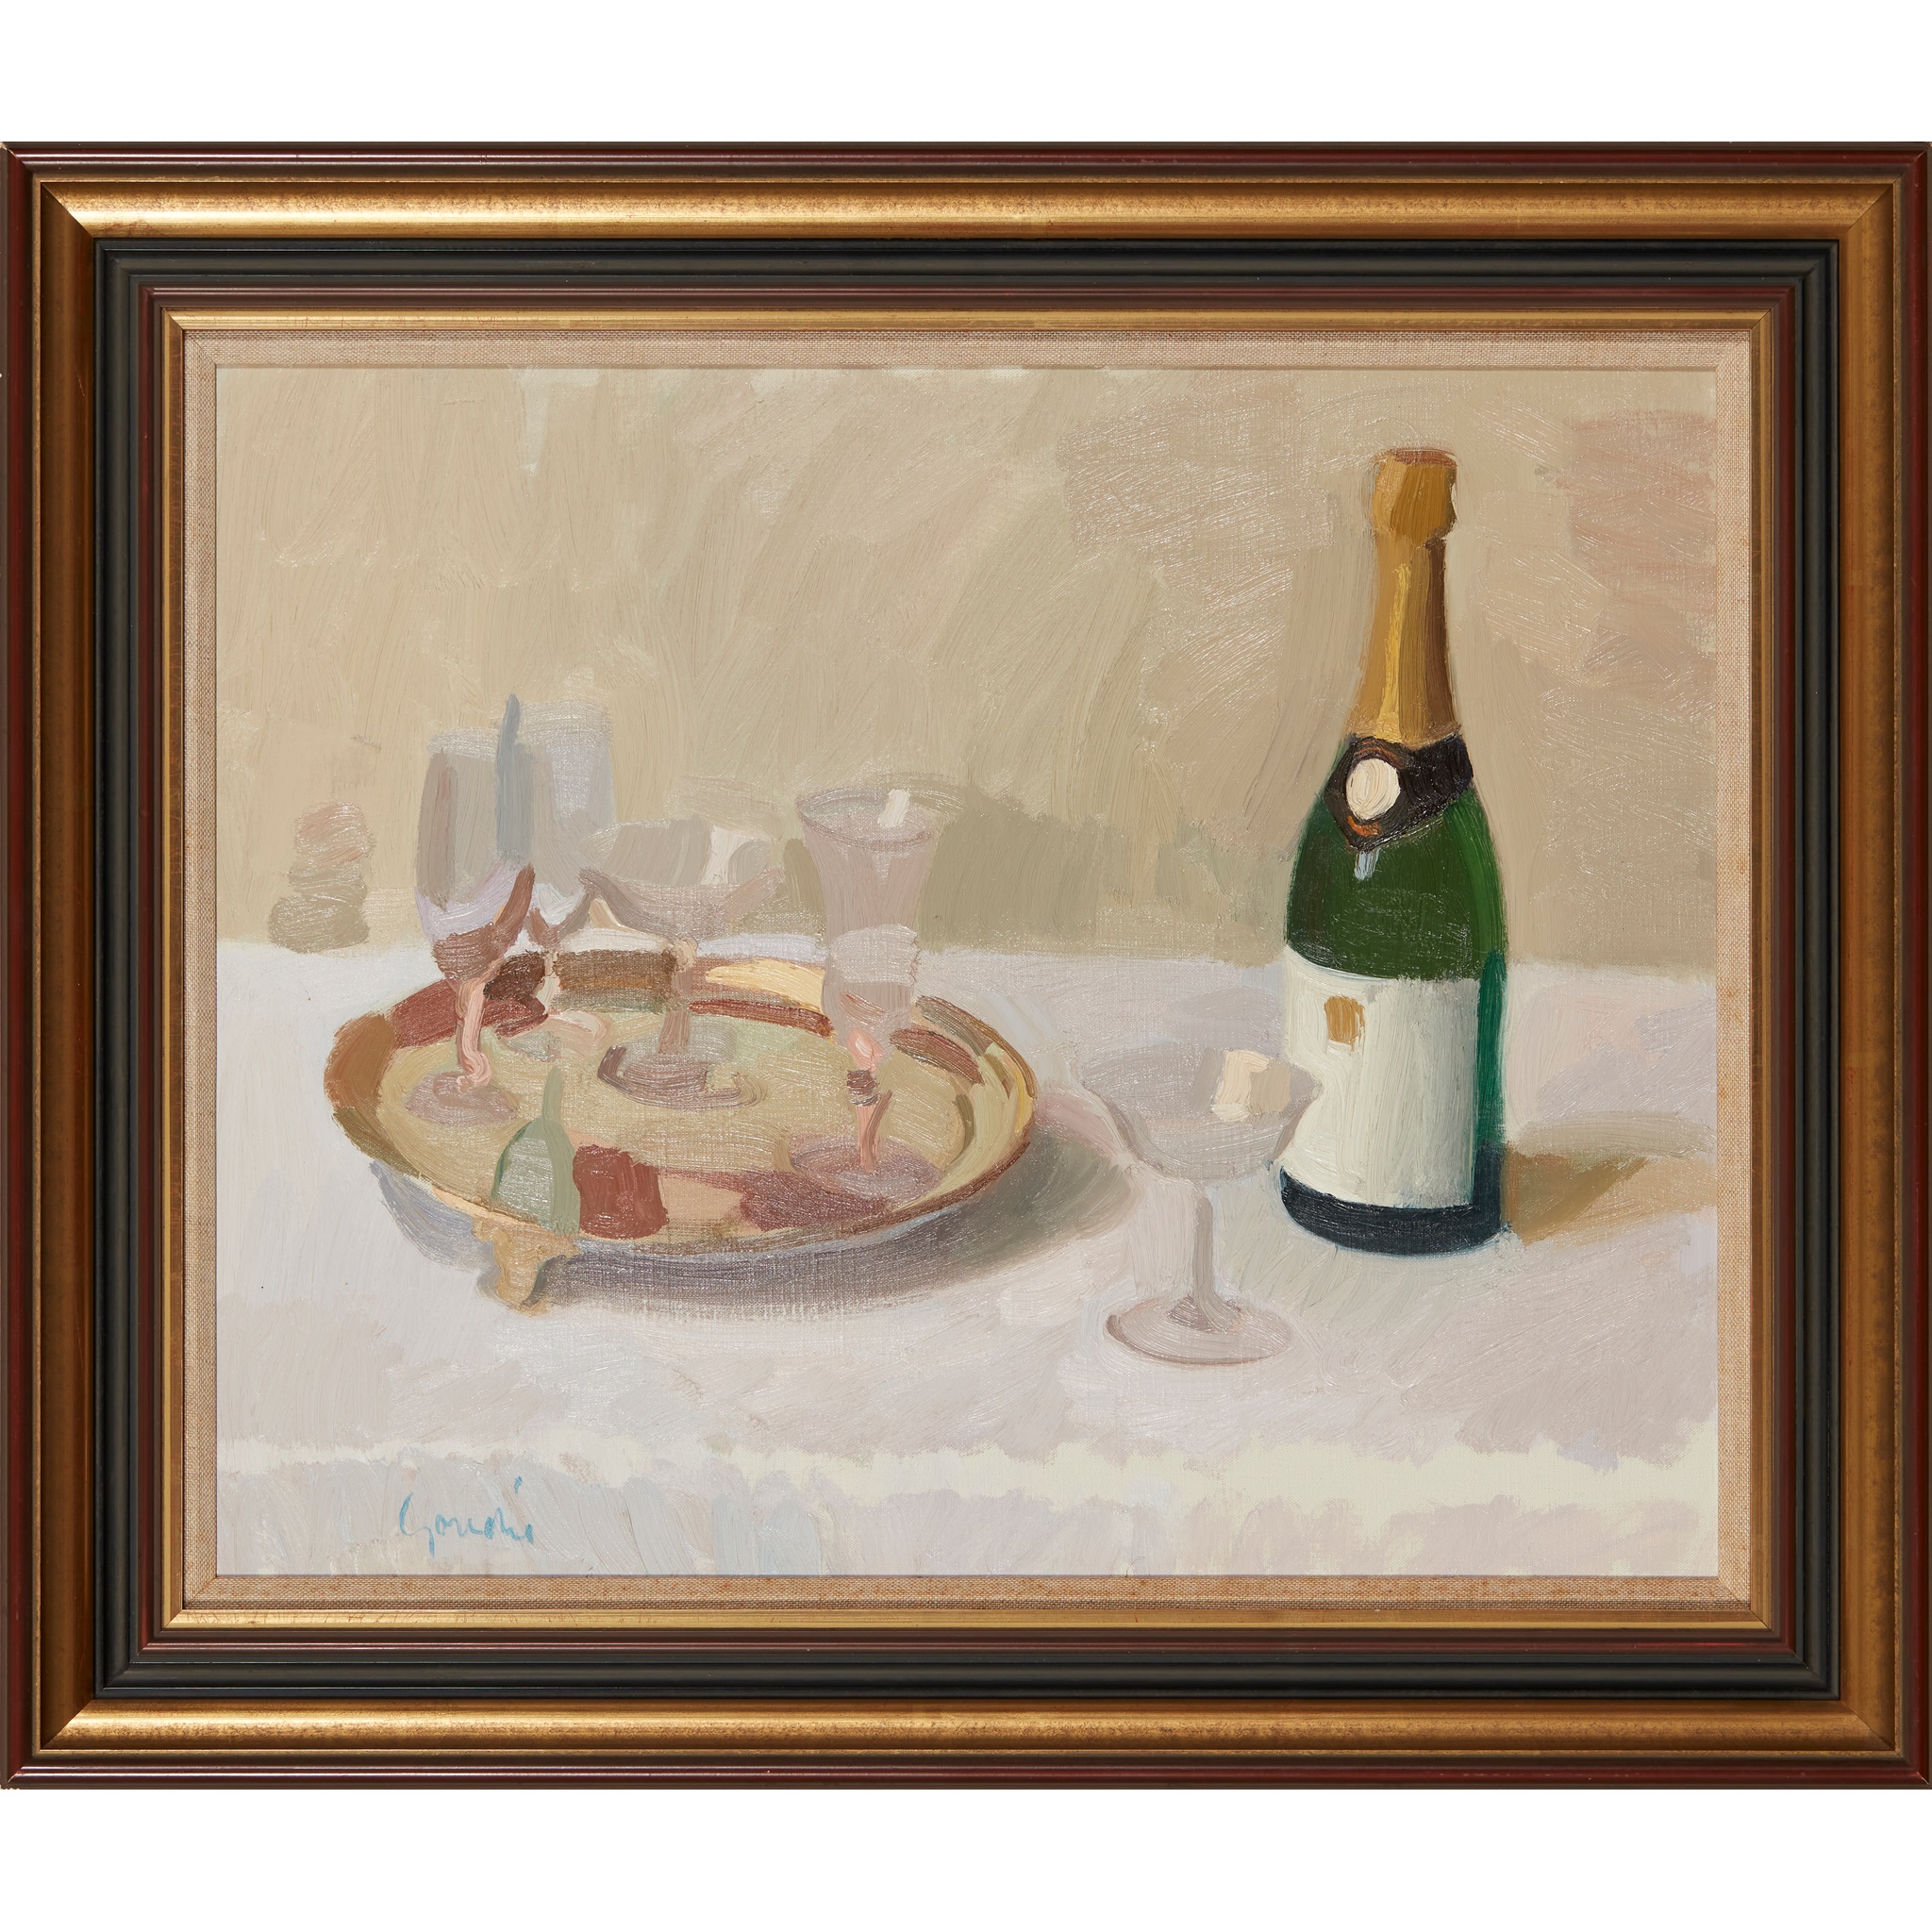 § ALEXANDER GOUDIE (SCOTTISH 1933-2004) STILL LIFE WITH CHAMPAGNE BOTTLE AND GLASSES - Image 2 of 3